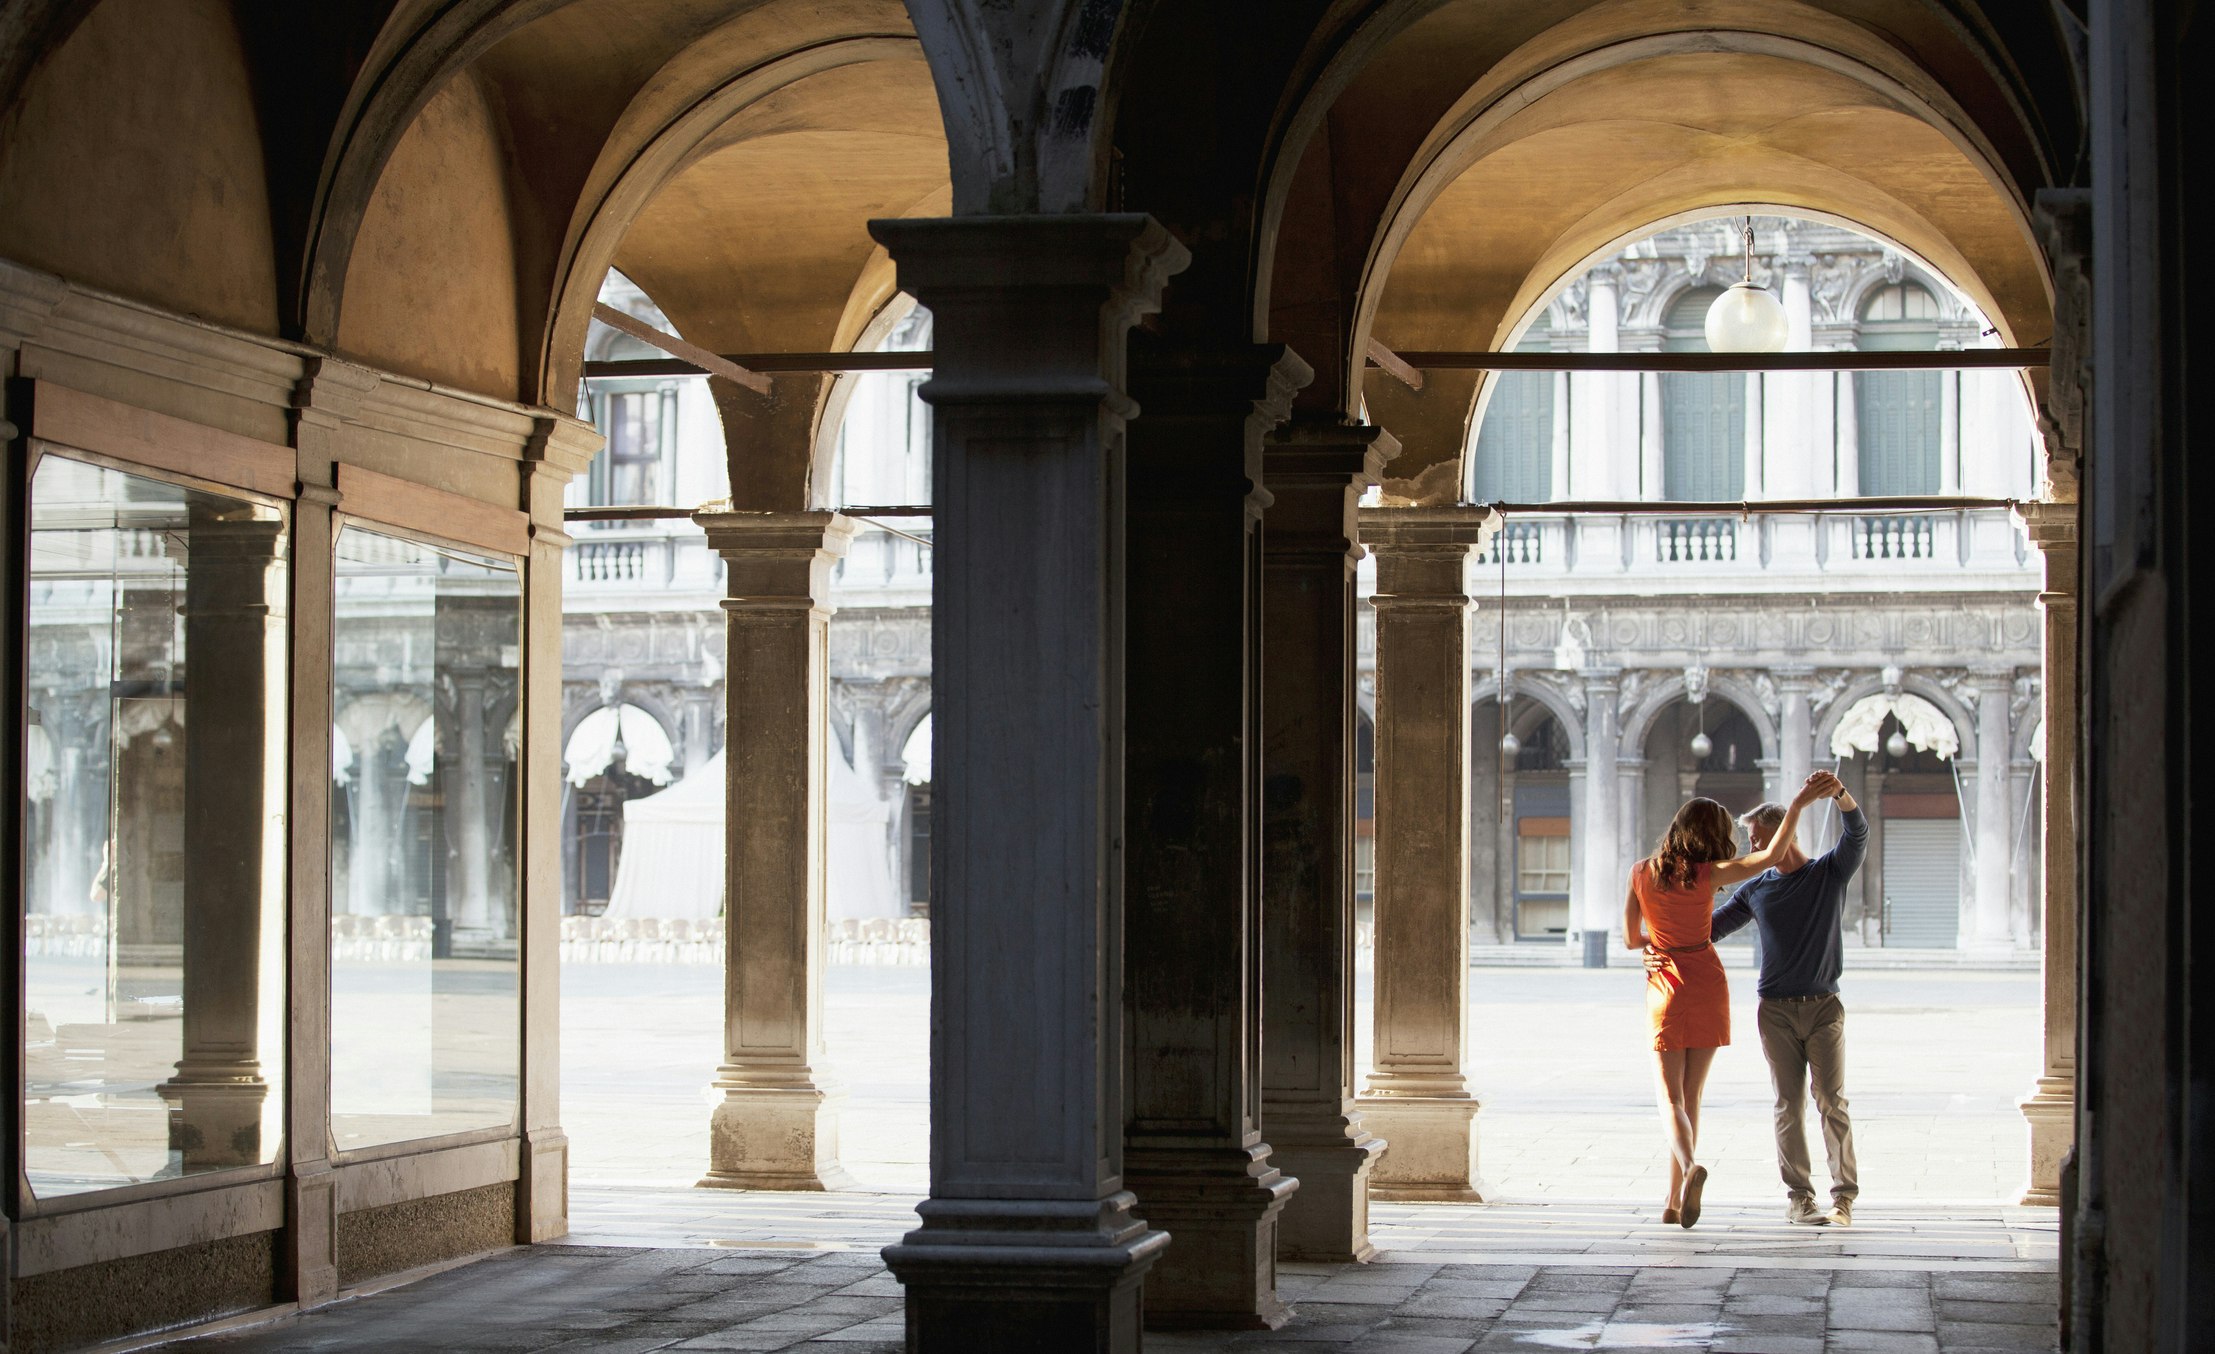 A couple dances in an archway in Venice